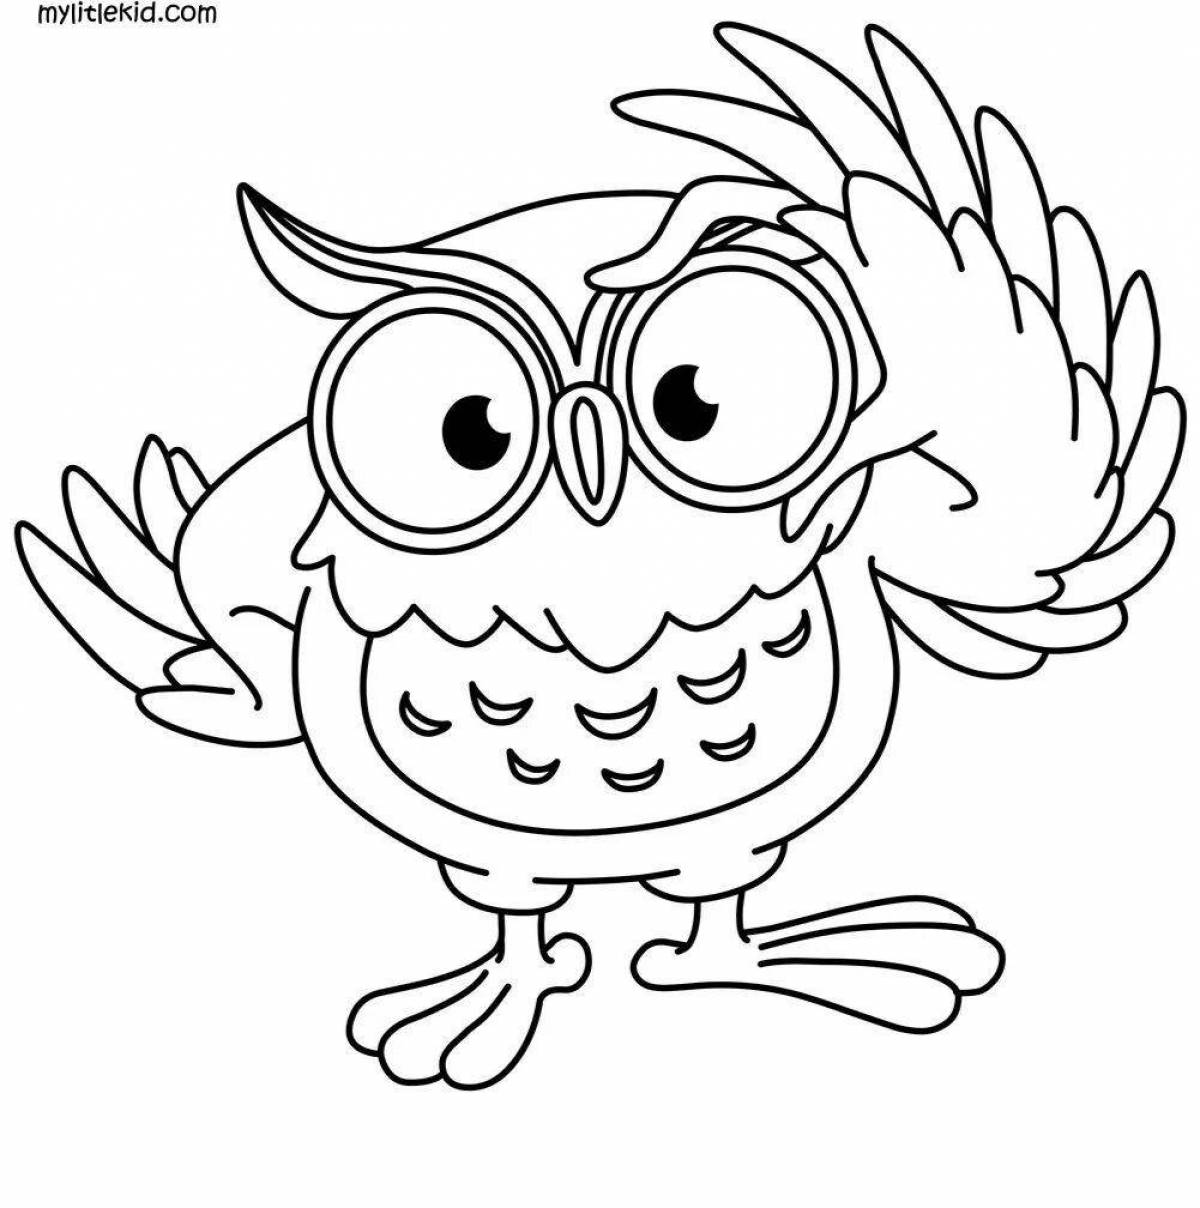 Exquisite smart owl coloring book for kids